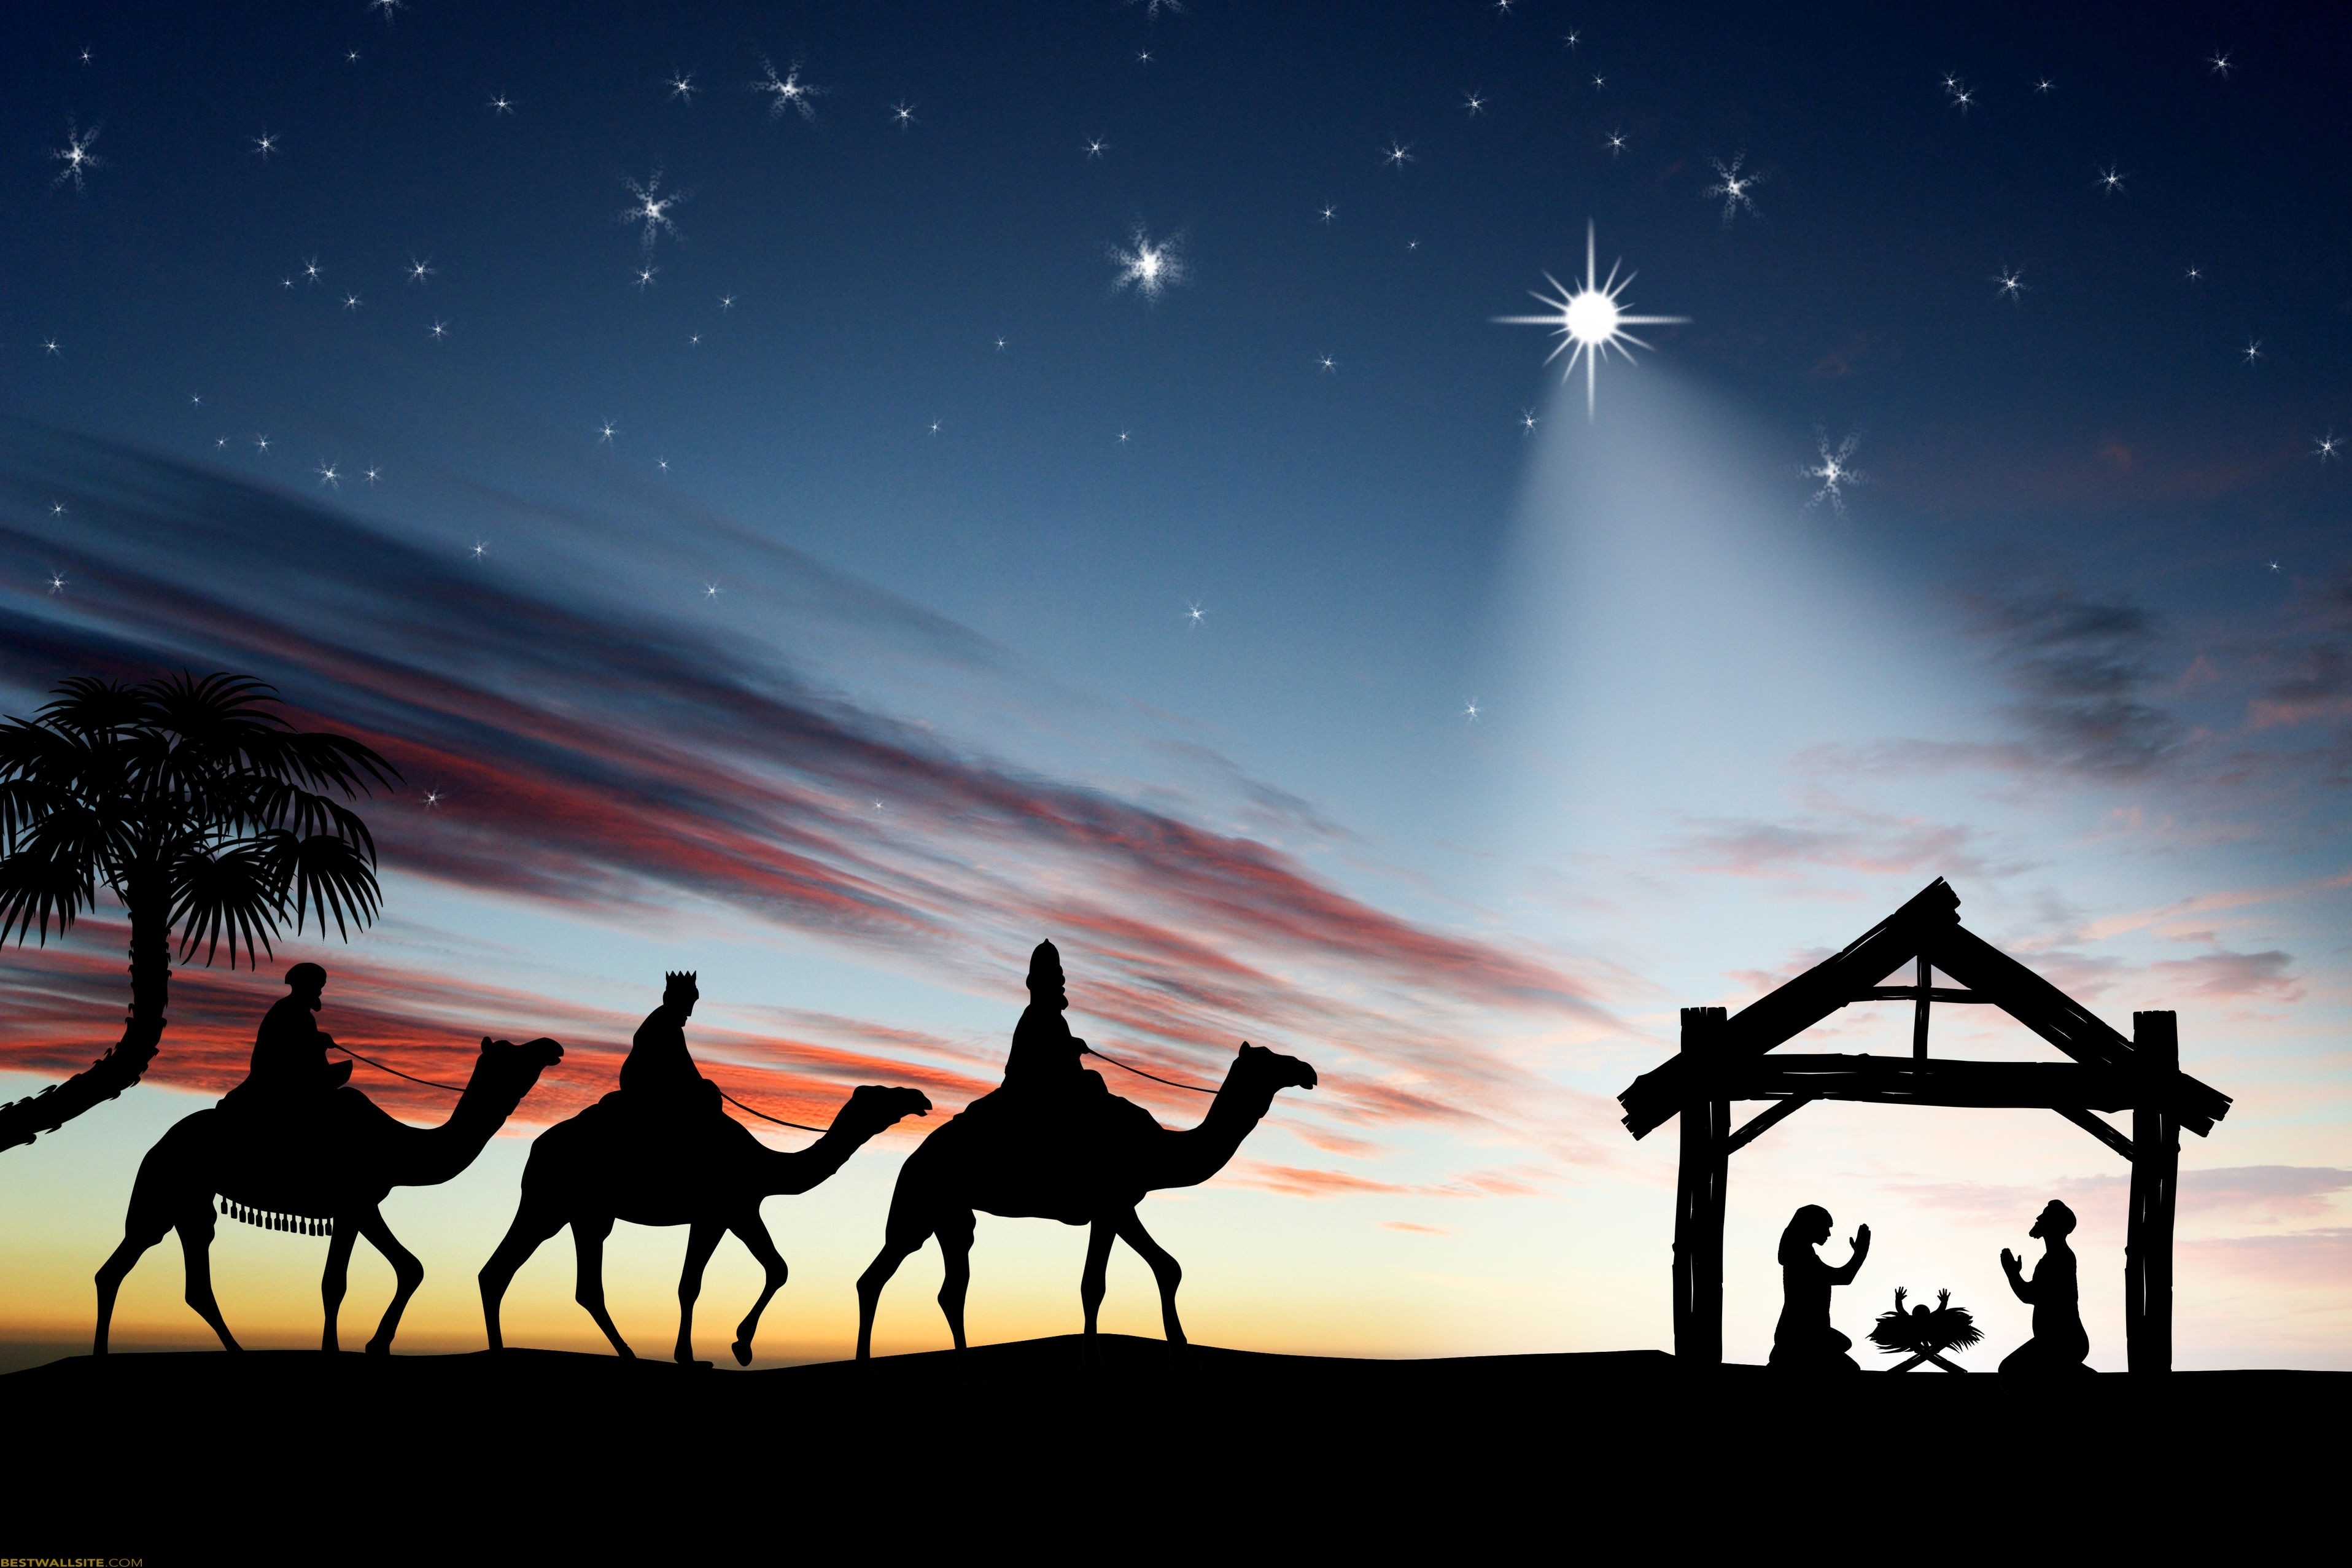 10 Top Christmas Nativity Background Images Full Hd 1080p For Pc 